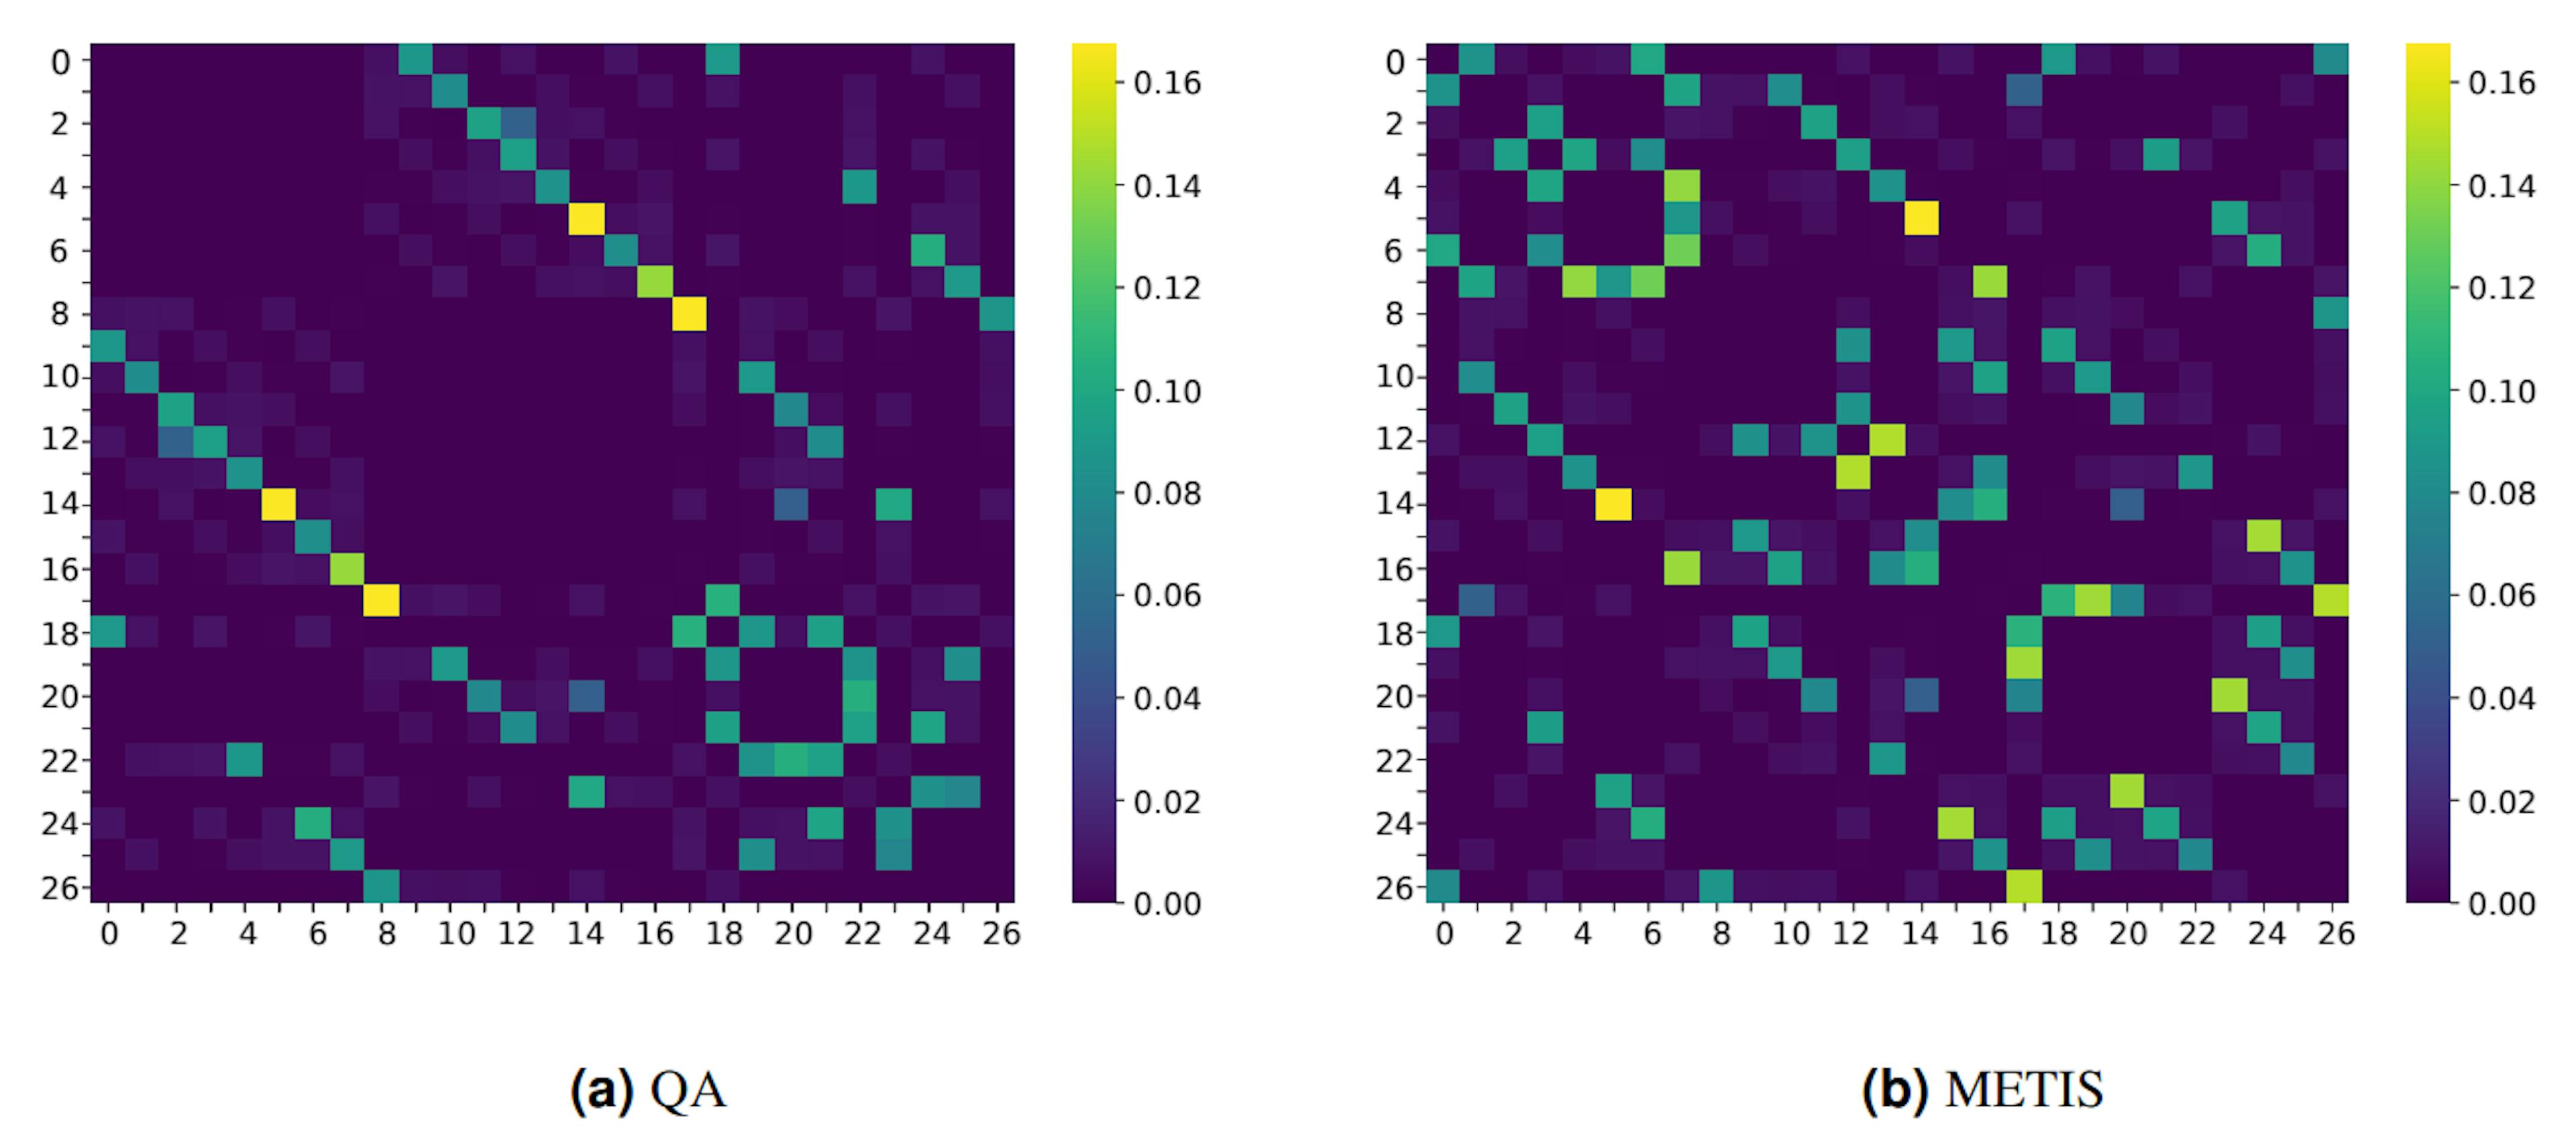 Figure 10. Heat maps for the partitions from QA and METIS respectively. Each entry in the matrix represents an edge between two nodes with the corresponding indices along the outer edges. The color intensity indicates the normalised weight of a cut edge. A higher proportion of low weight entries (i.e. light purple) implies a better partition as opposed to more highly weighted cut edges (i.e. green/yellow).